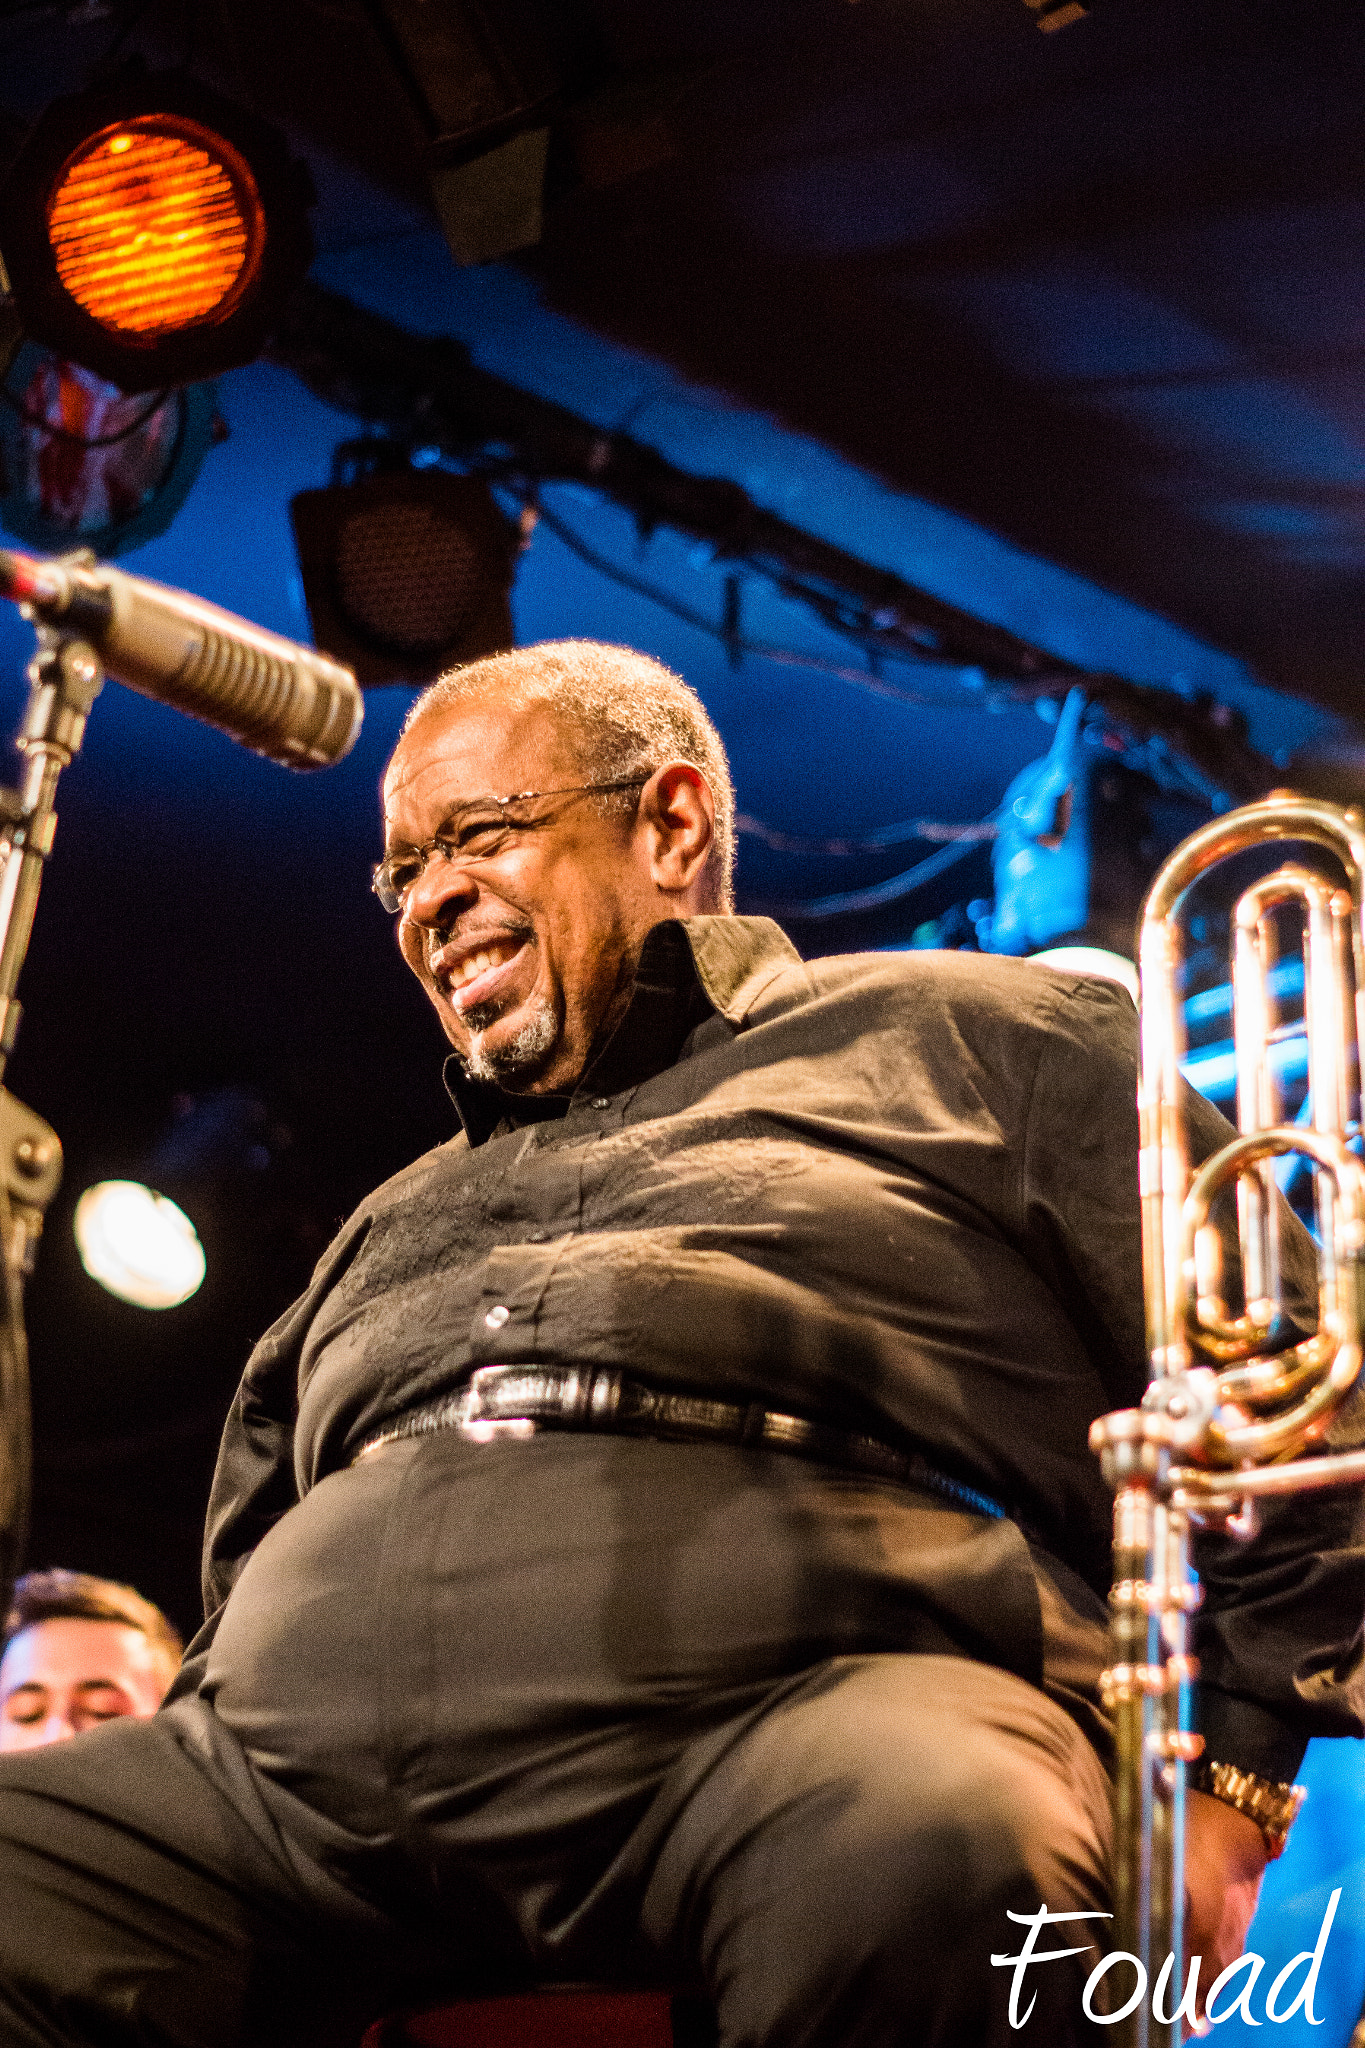 Sony SLT-A77 + Minolta AF 50mm F1.7 New sample photo. Fred wesley live in paris, 2016 photography